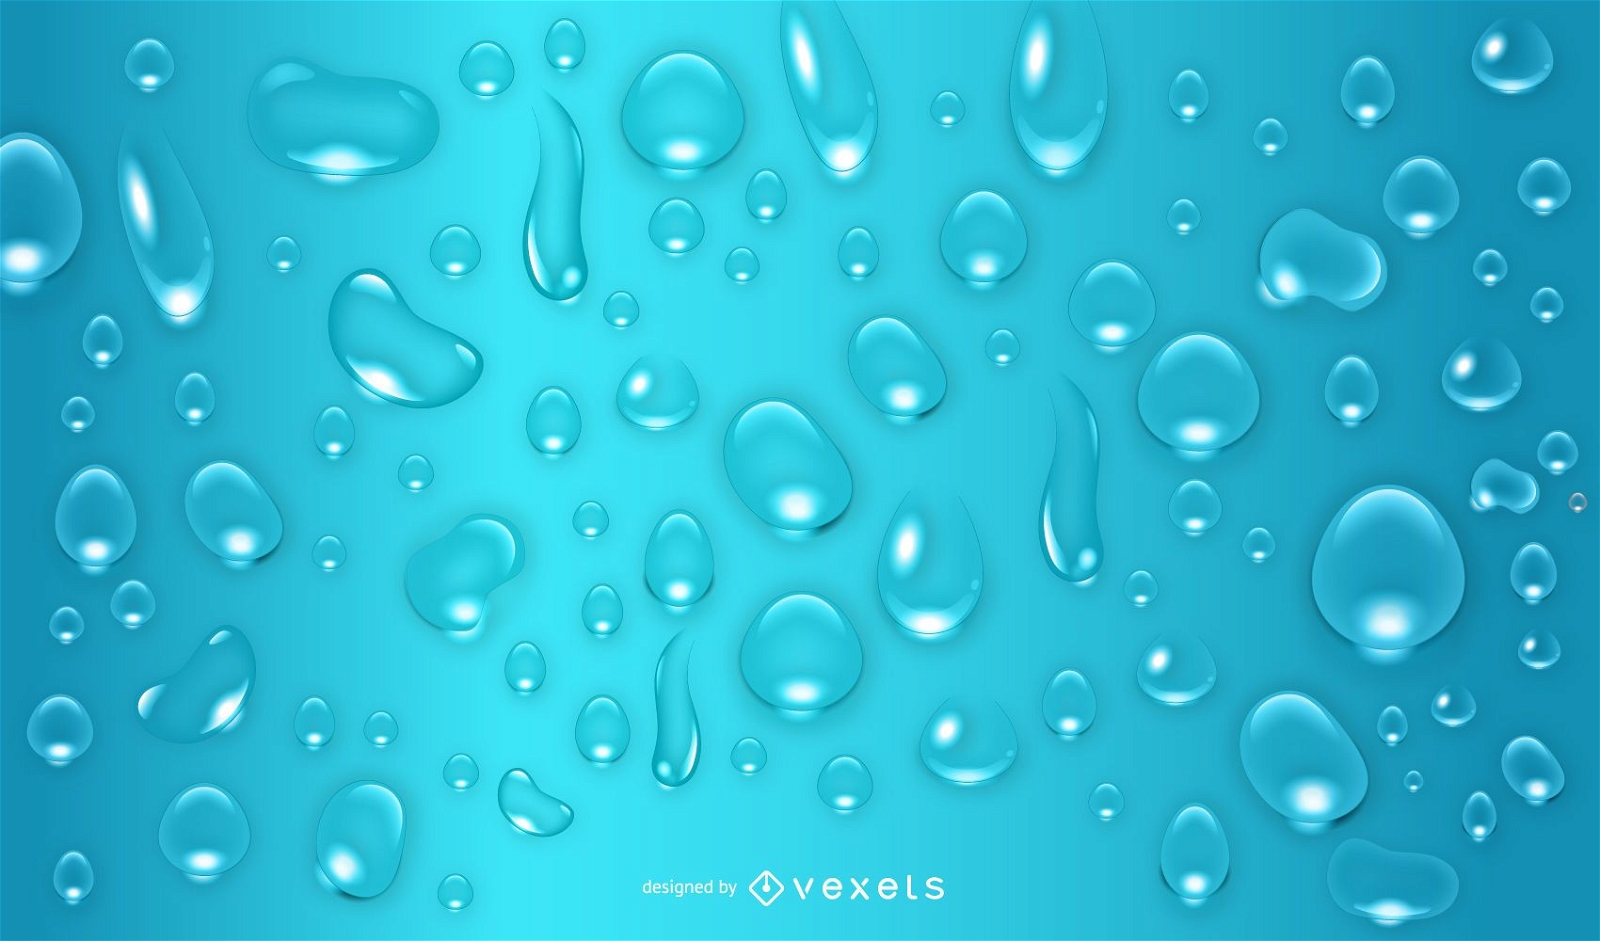 Waterdrops on glass